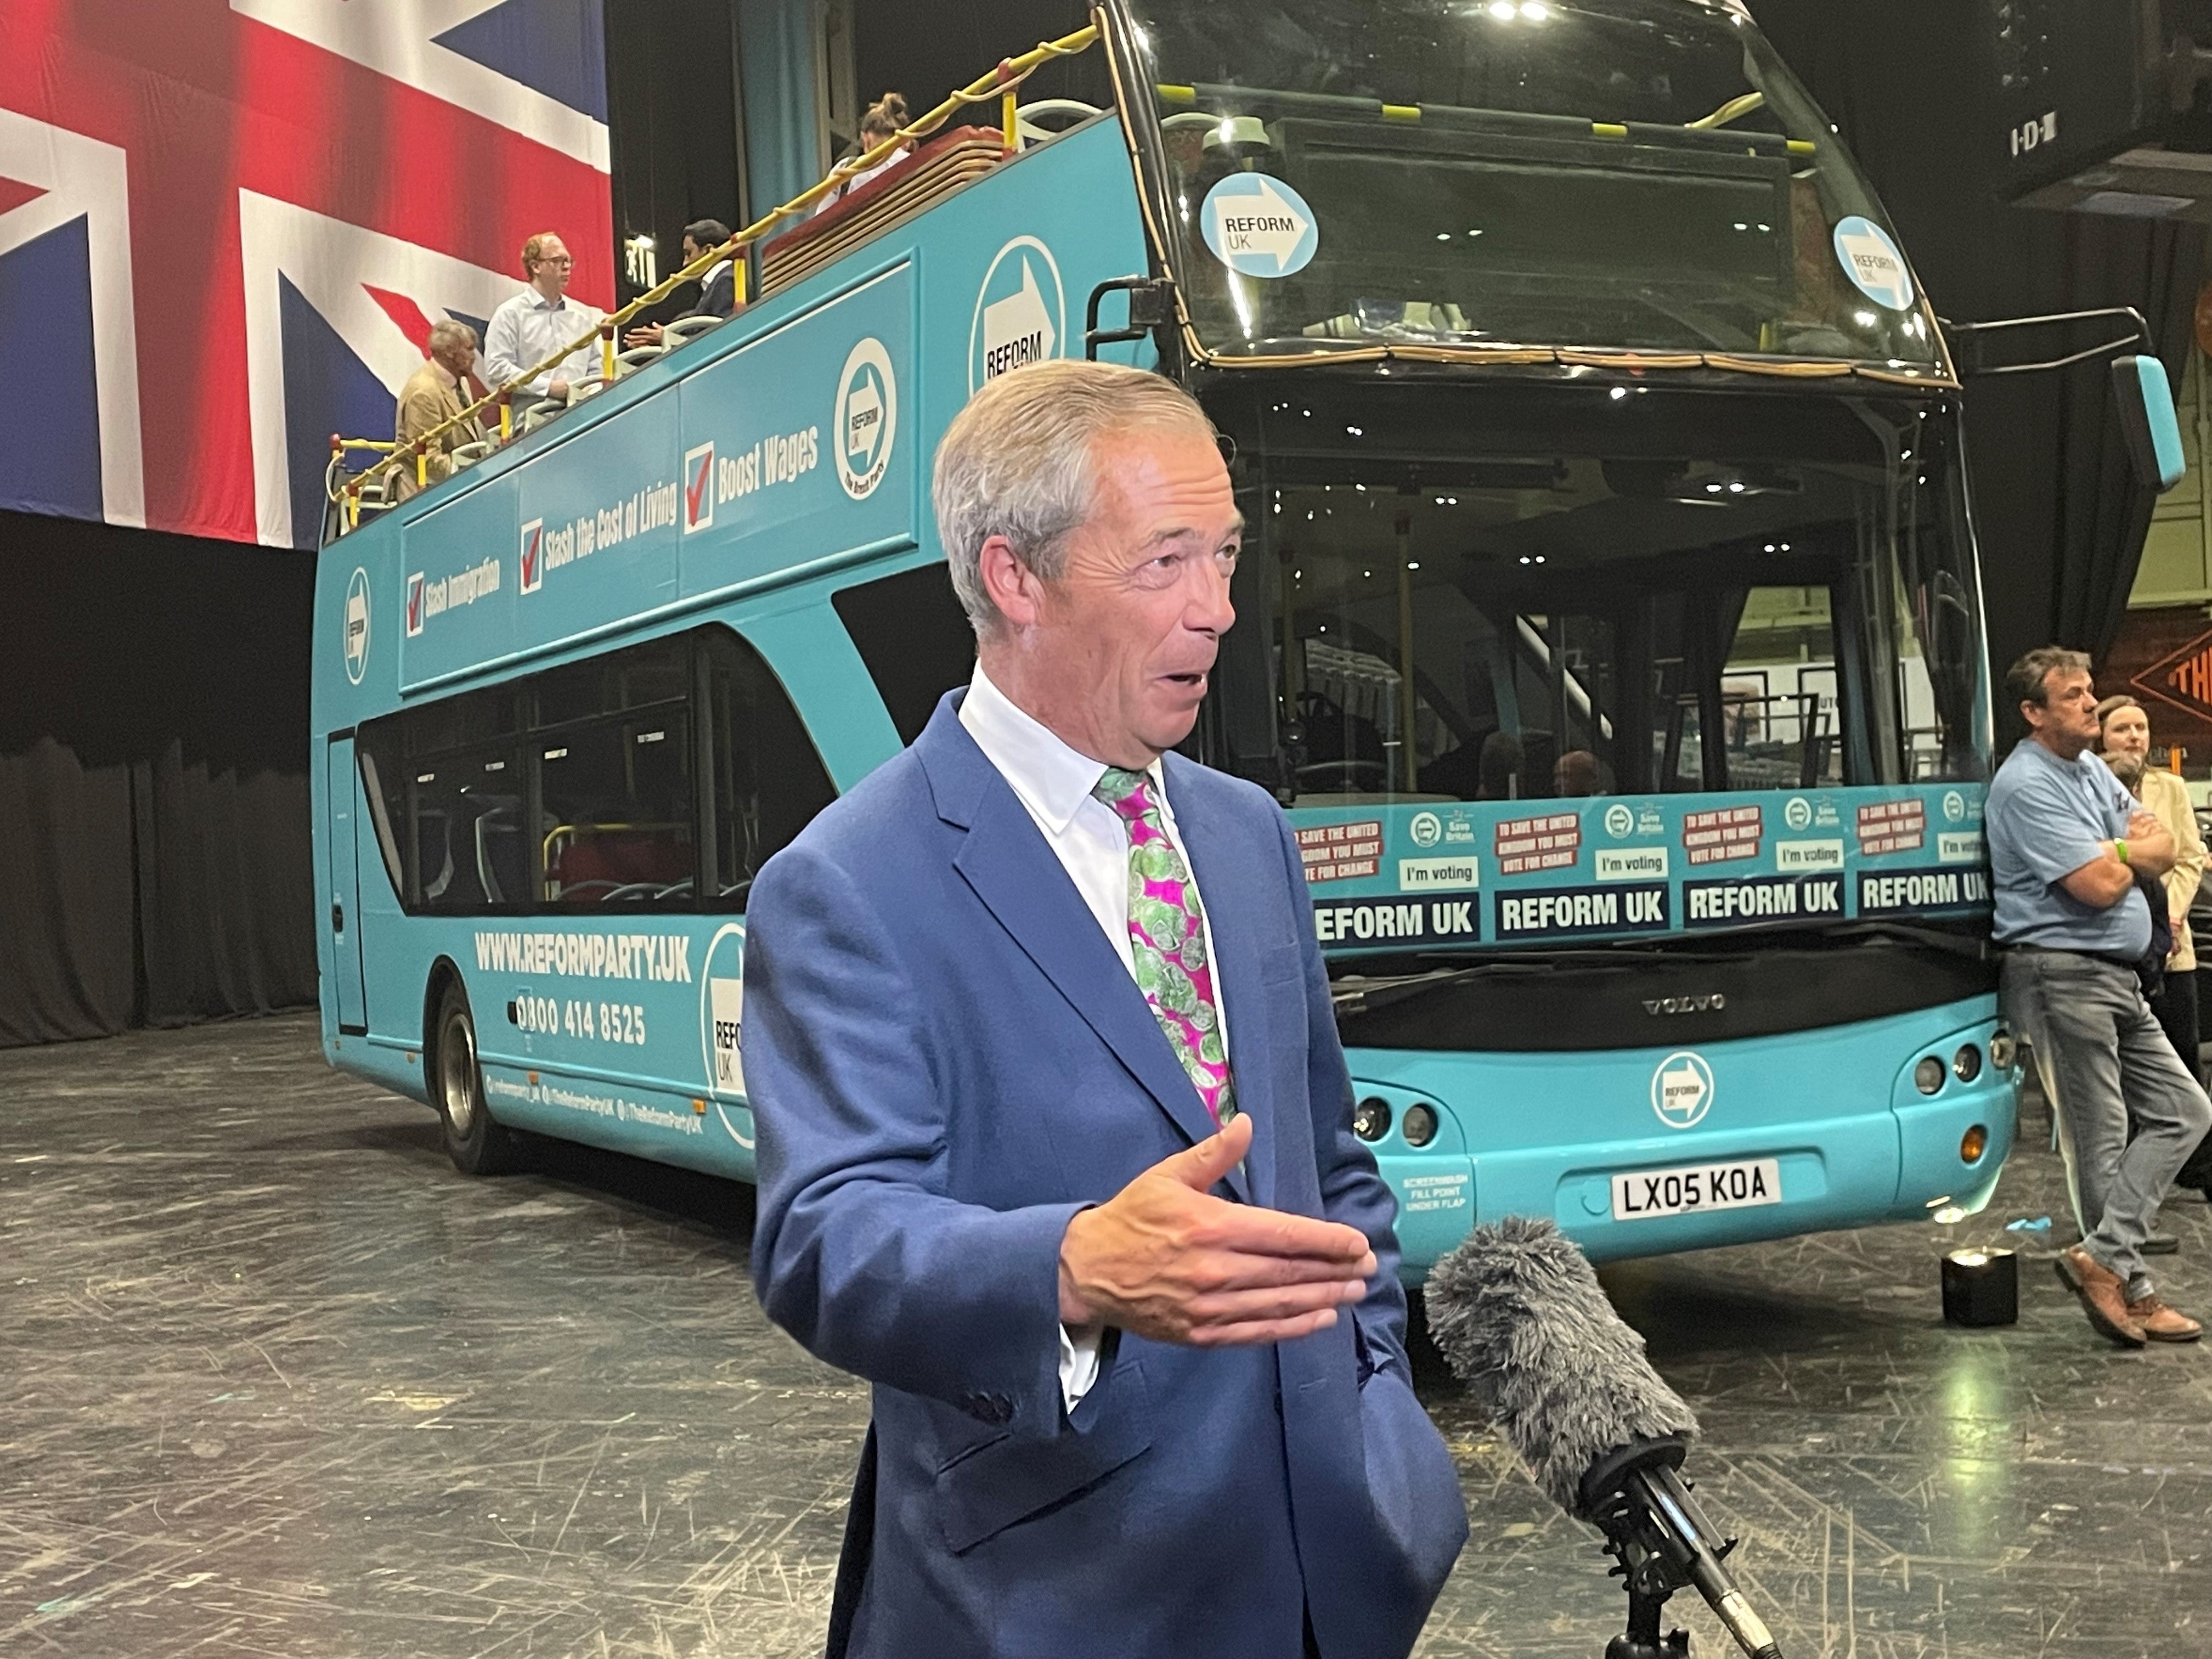 Reform UK leader Nigel Farage speaking to the media after the rally for his party at Birmingham’s NEC, while on the General Election campaign trail (Matthew Cooper/PA)